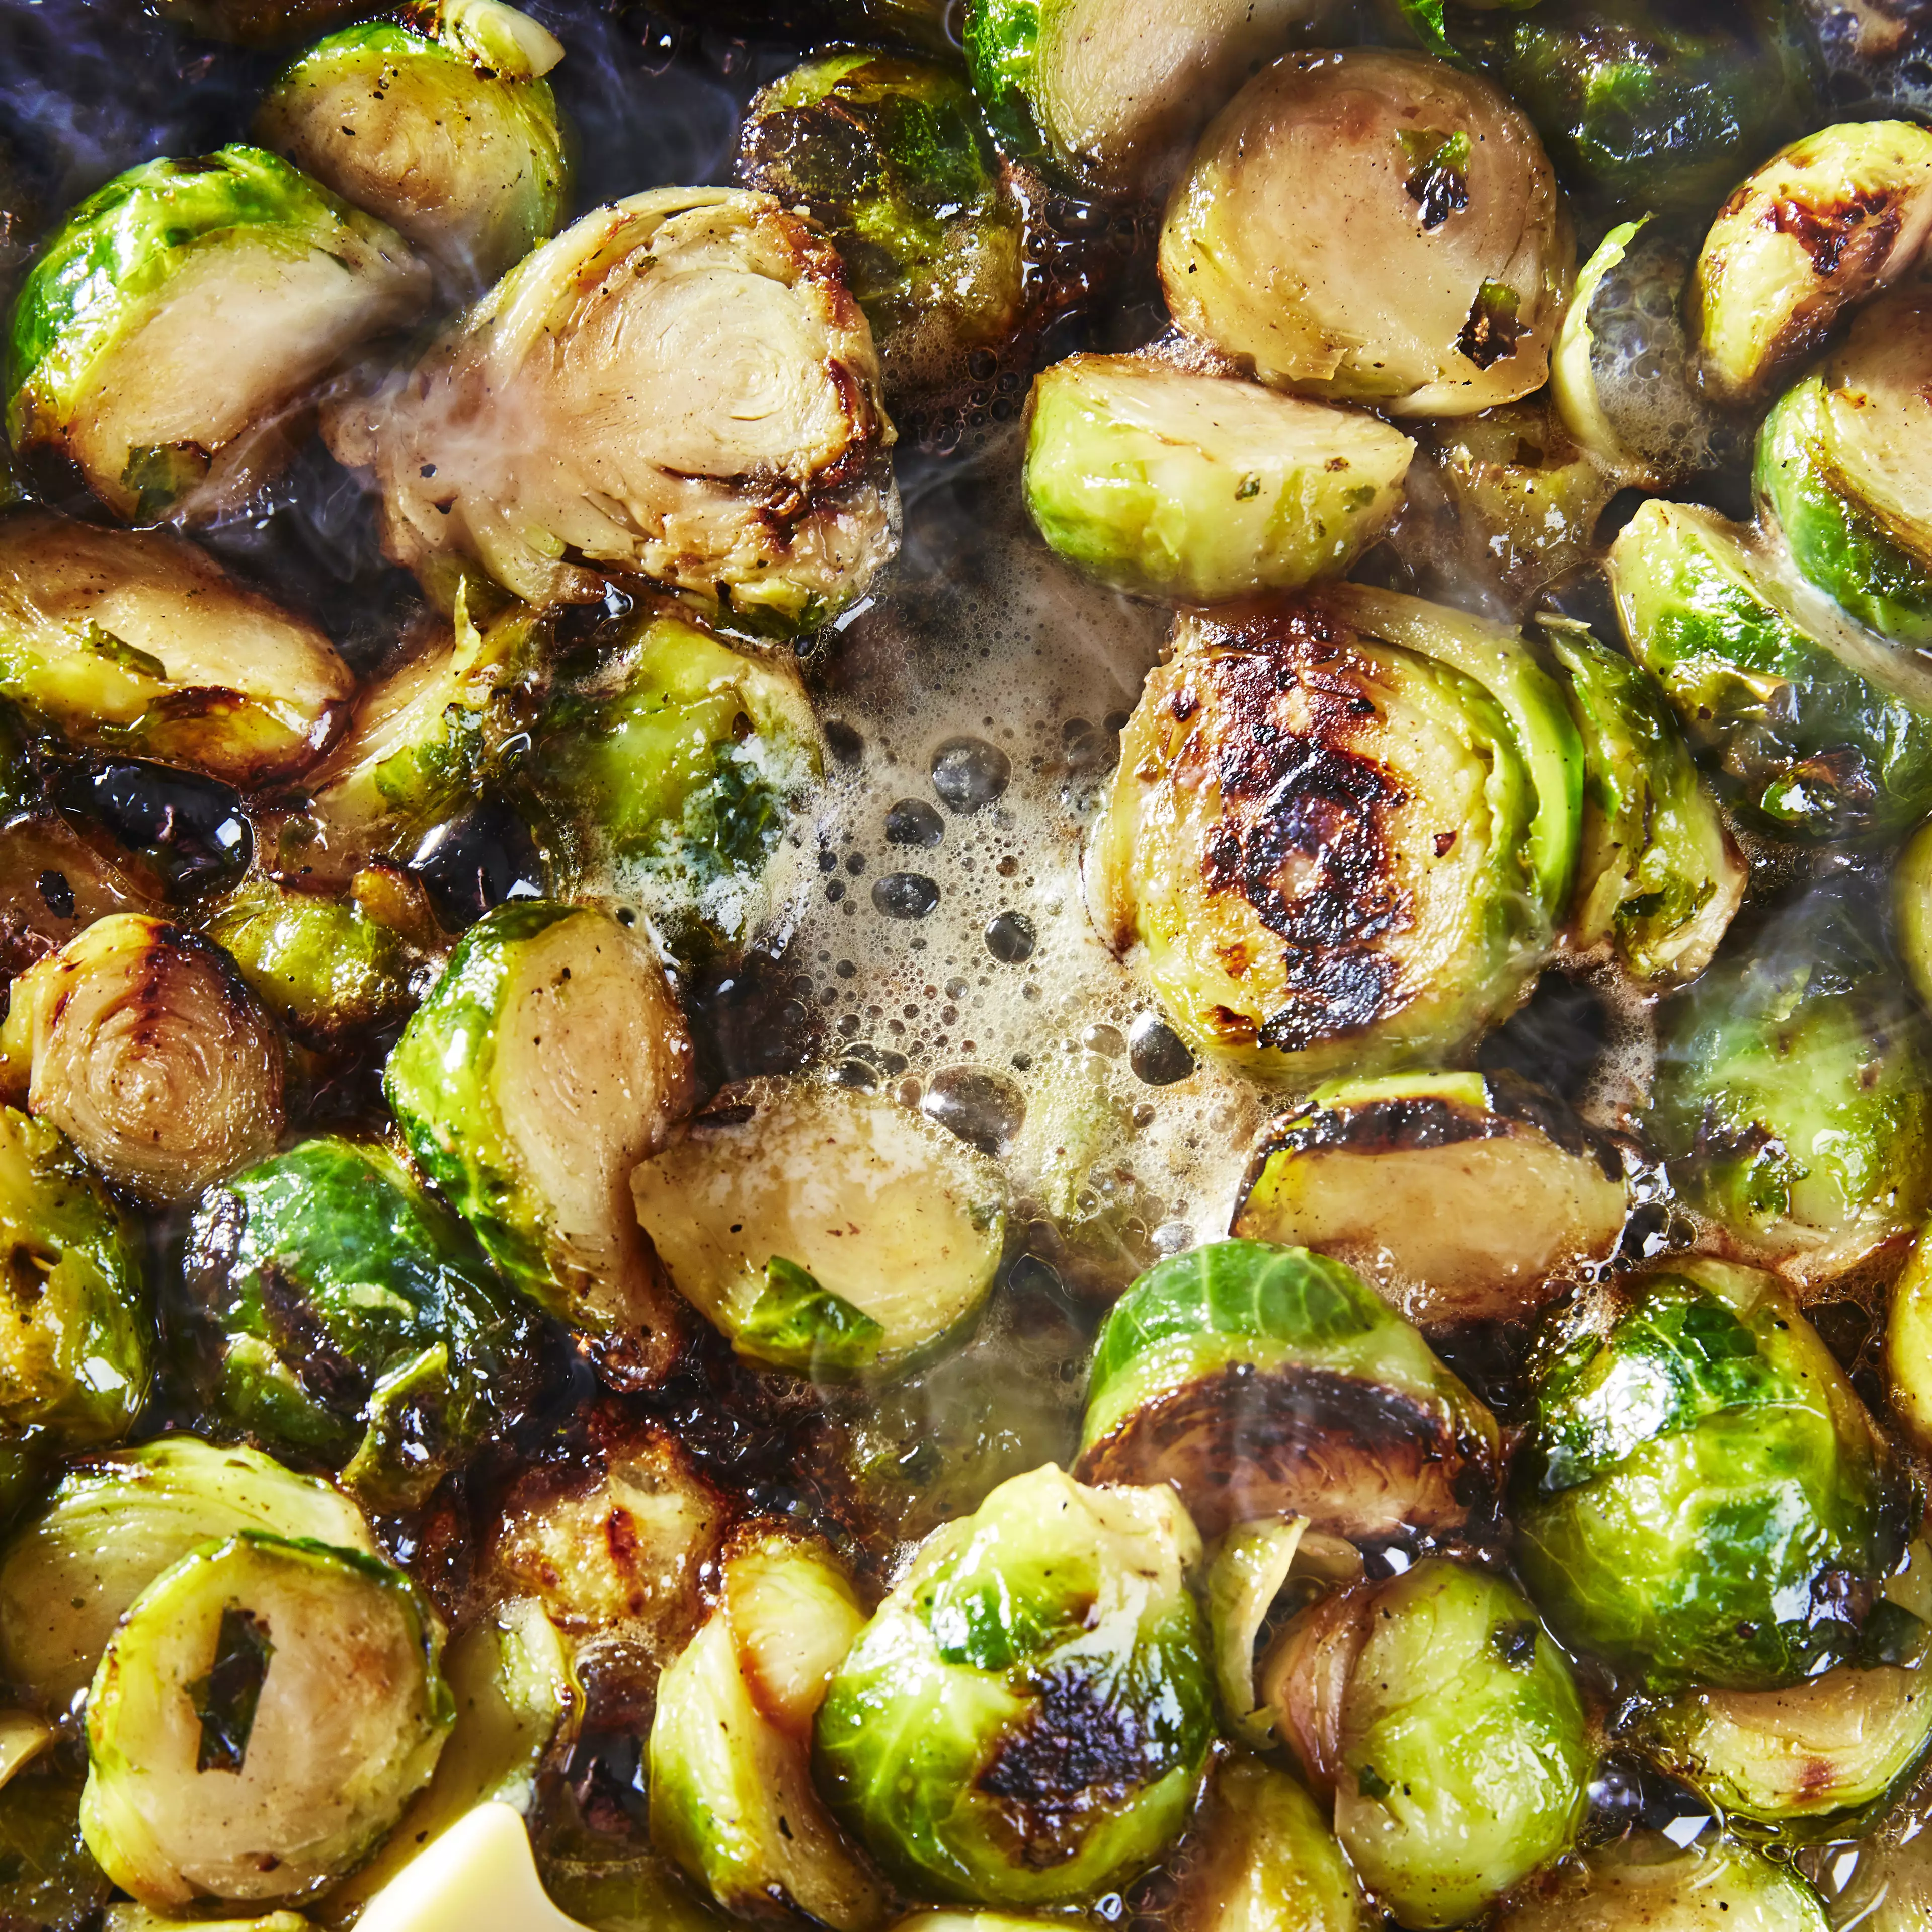 Would you be willing to try Brussels sprouts in Marmite butter?